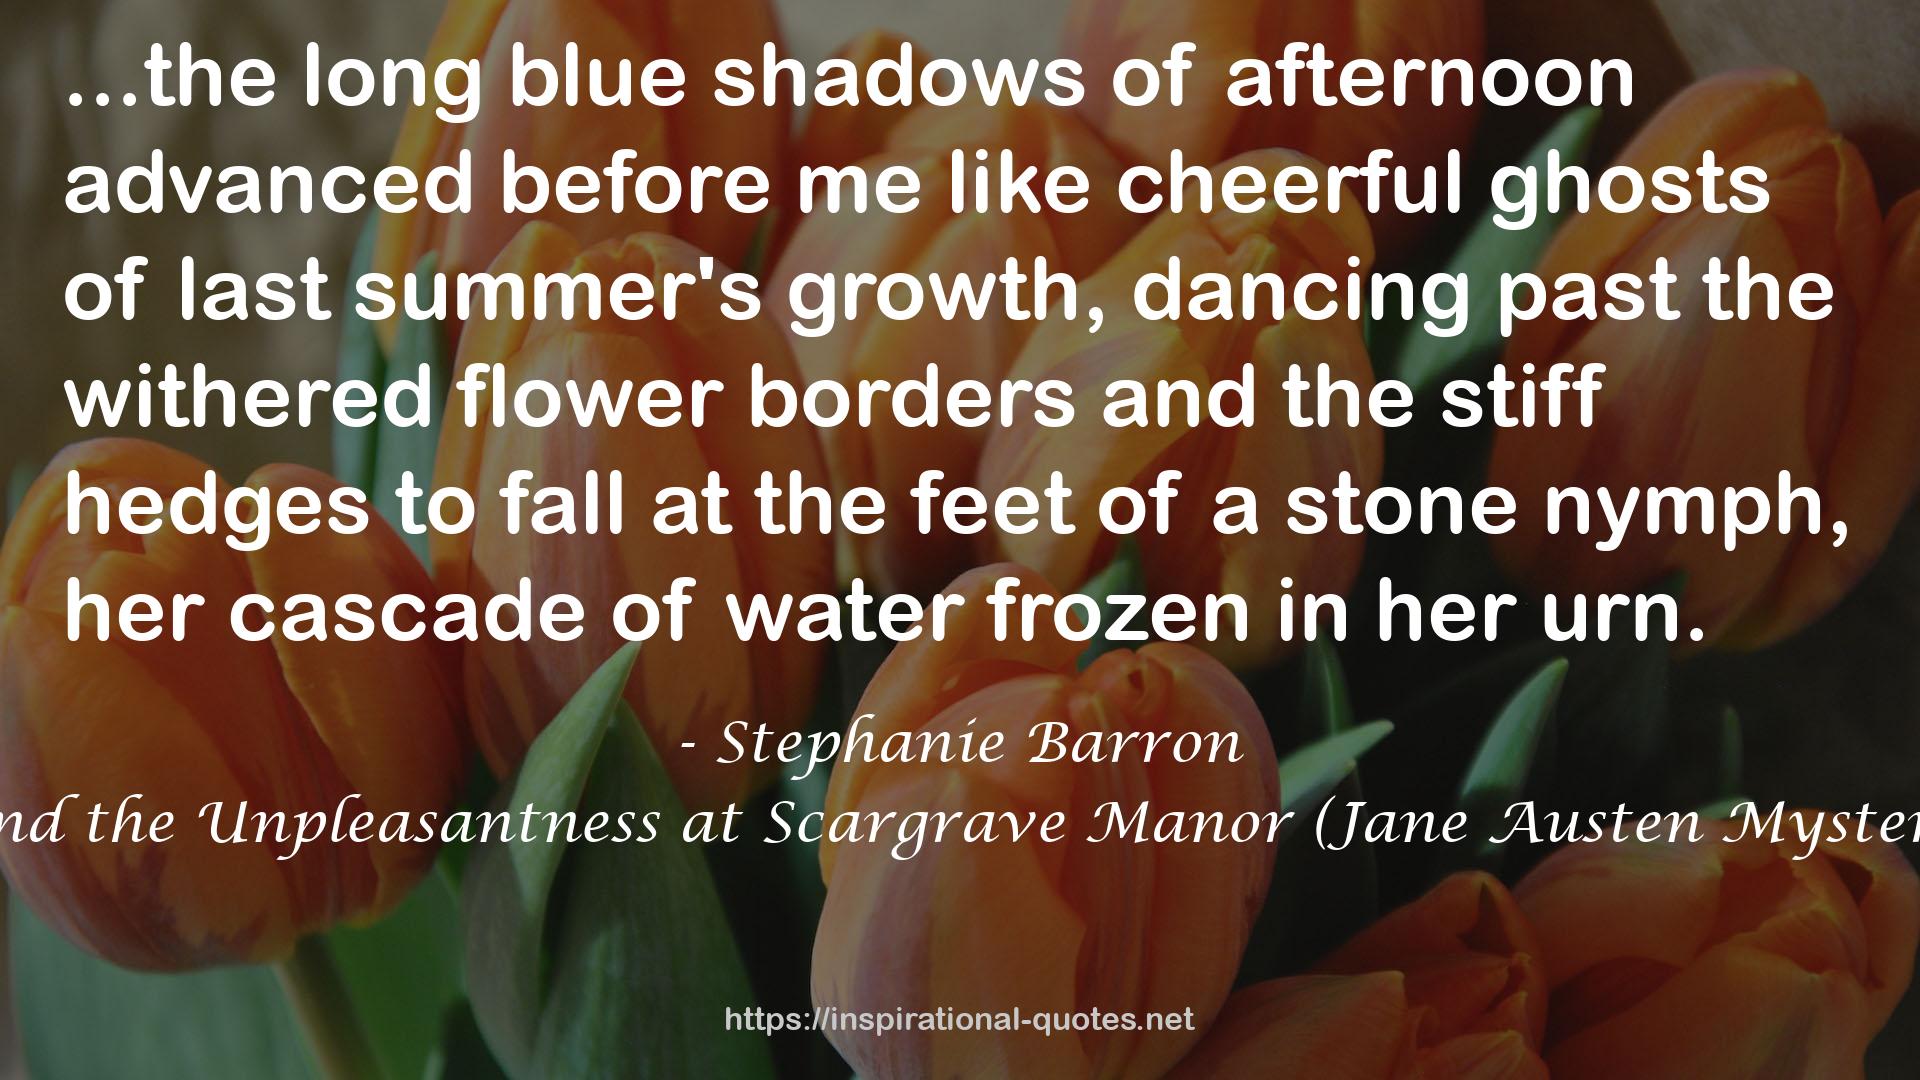 Jane and the Unpleasantness at Scargrave Manor (Jane Austen Mysteries, #1) QUOTES